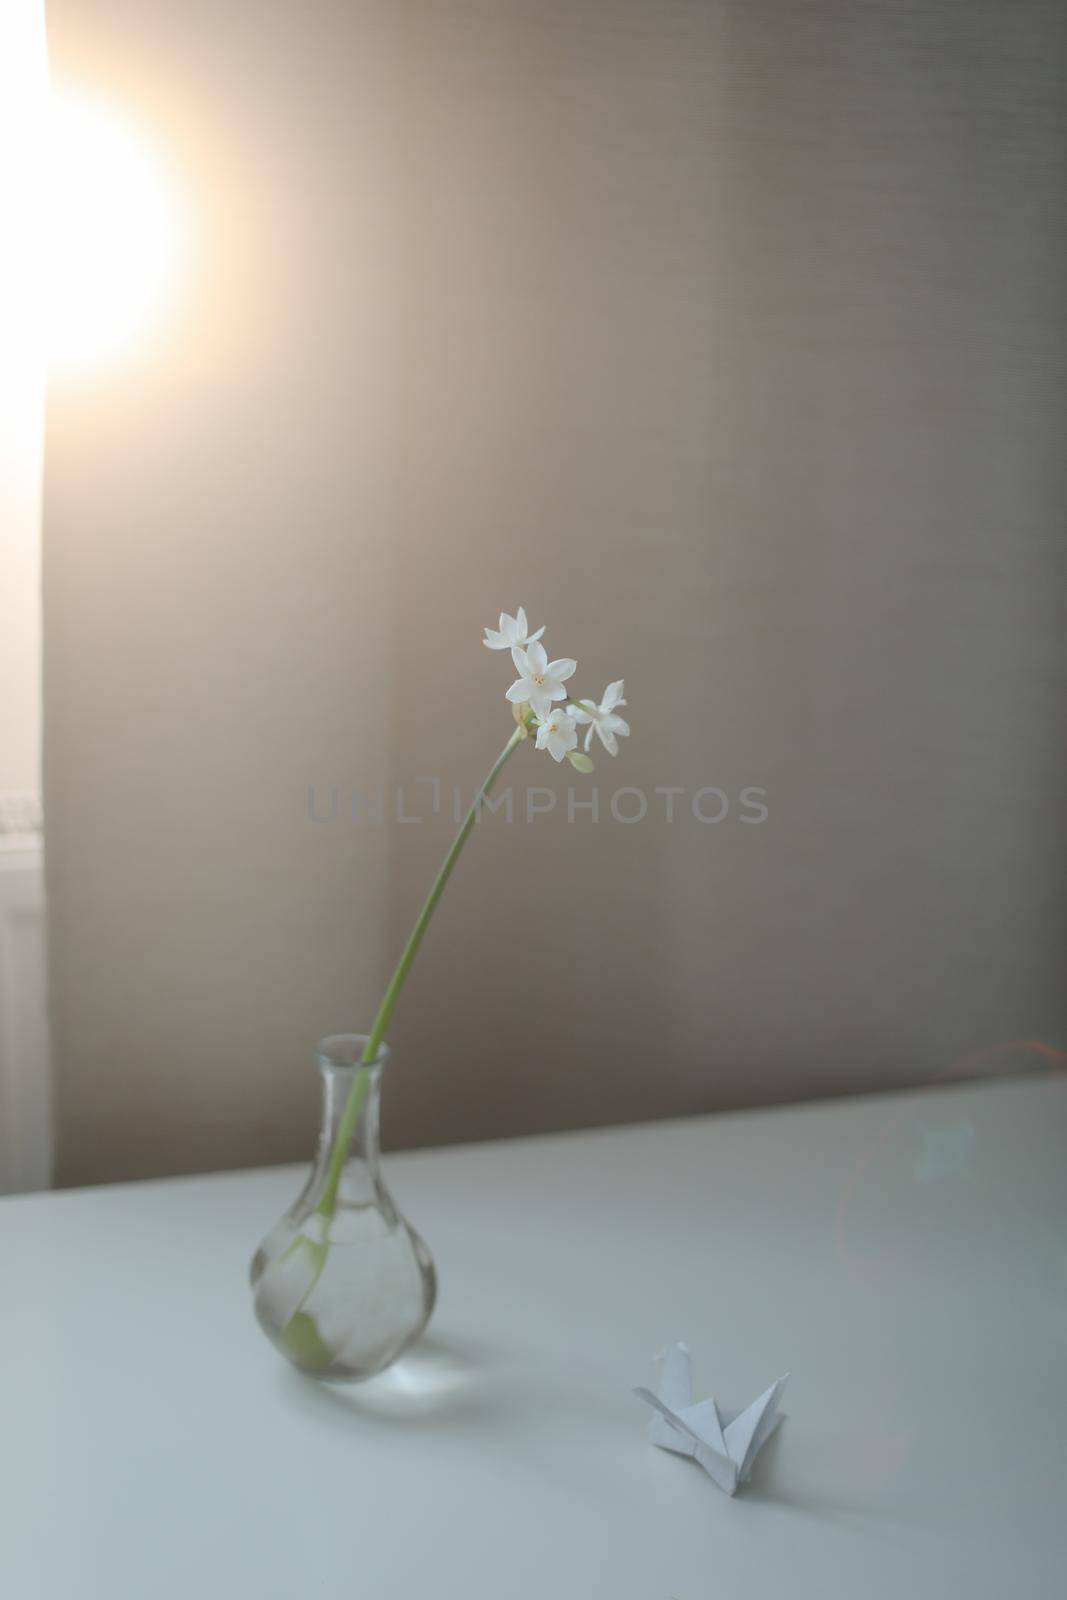 daffodil in a vase on the table in a cozy sunny room by paralisart